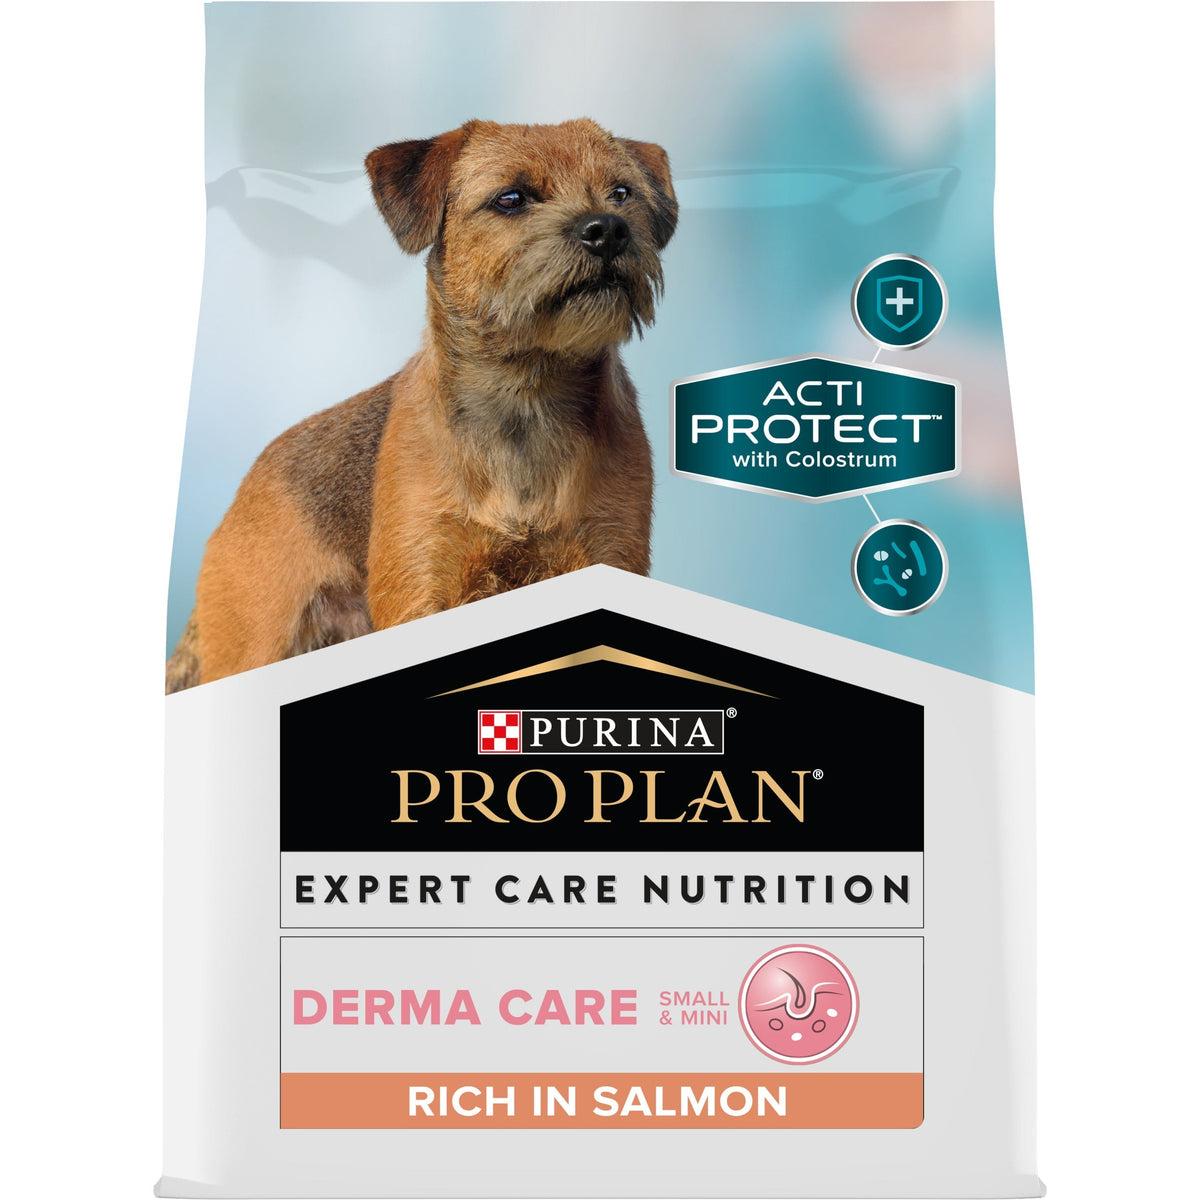 PURINA® PRO PLAN® Expert Care Nutrition - Canine Adult Small & Mini Derma Care - Salmon 3kg